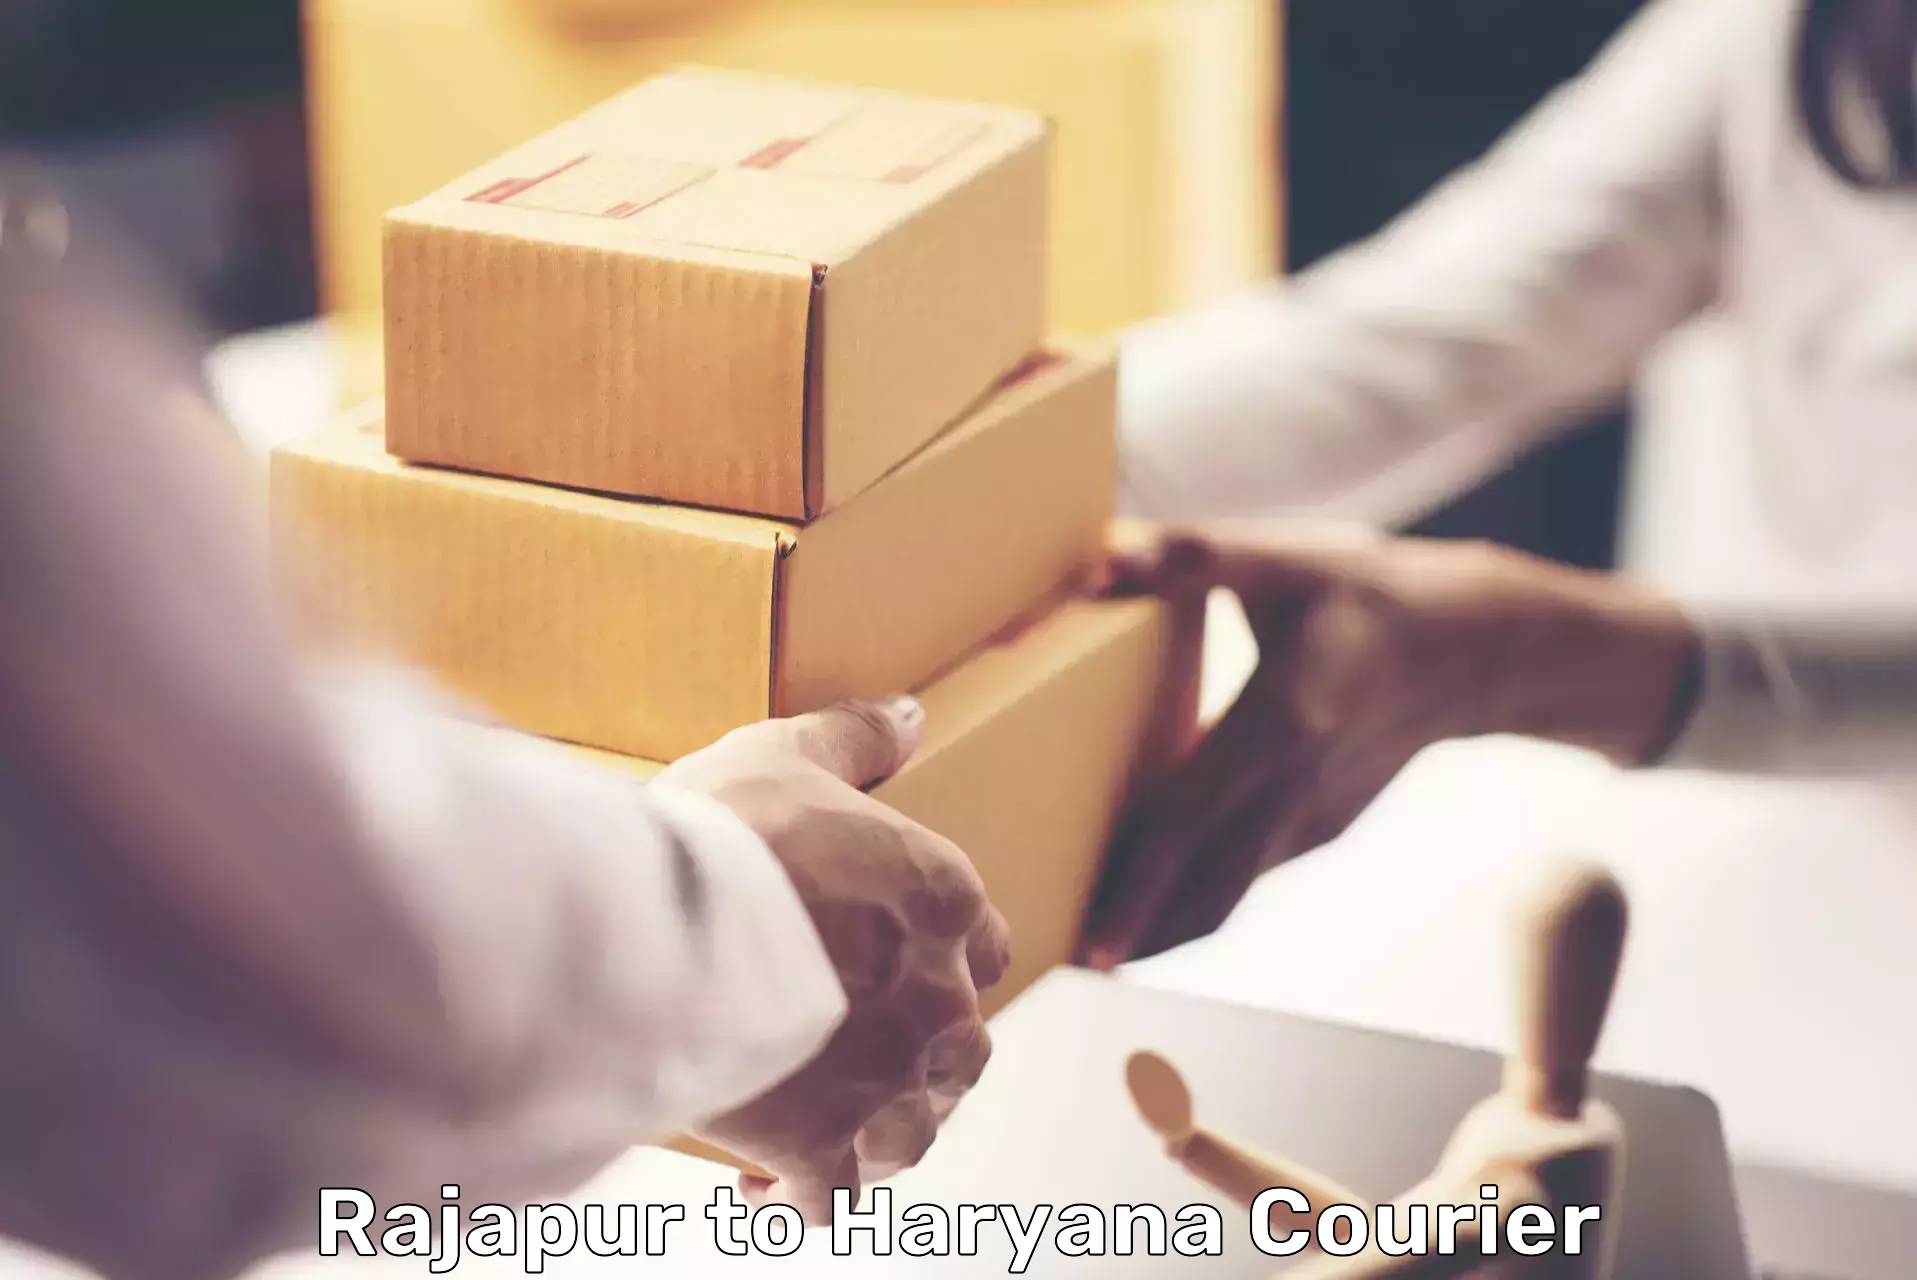 Dynamic courier operations Rajapur to Bilaspur Haryana